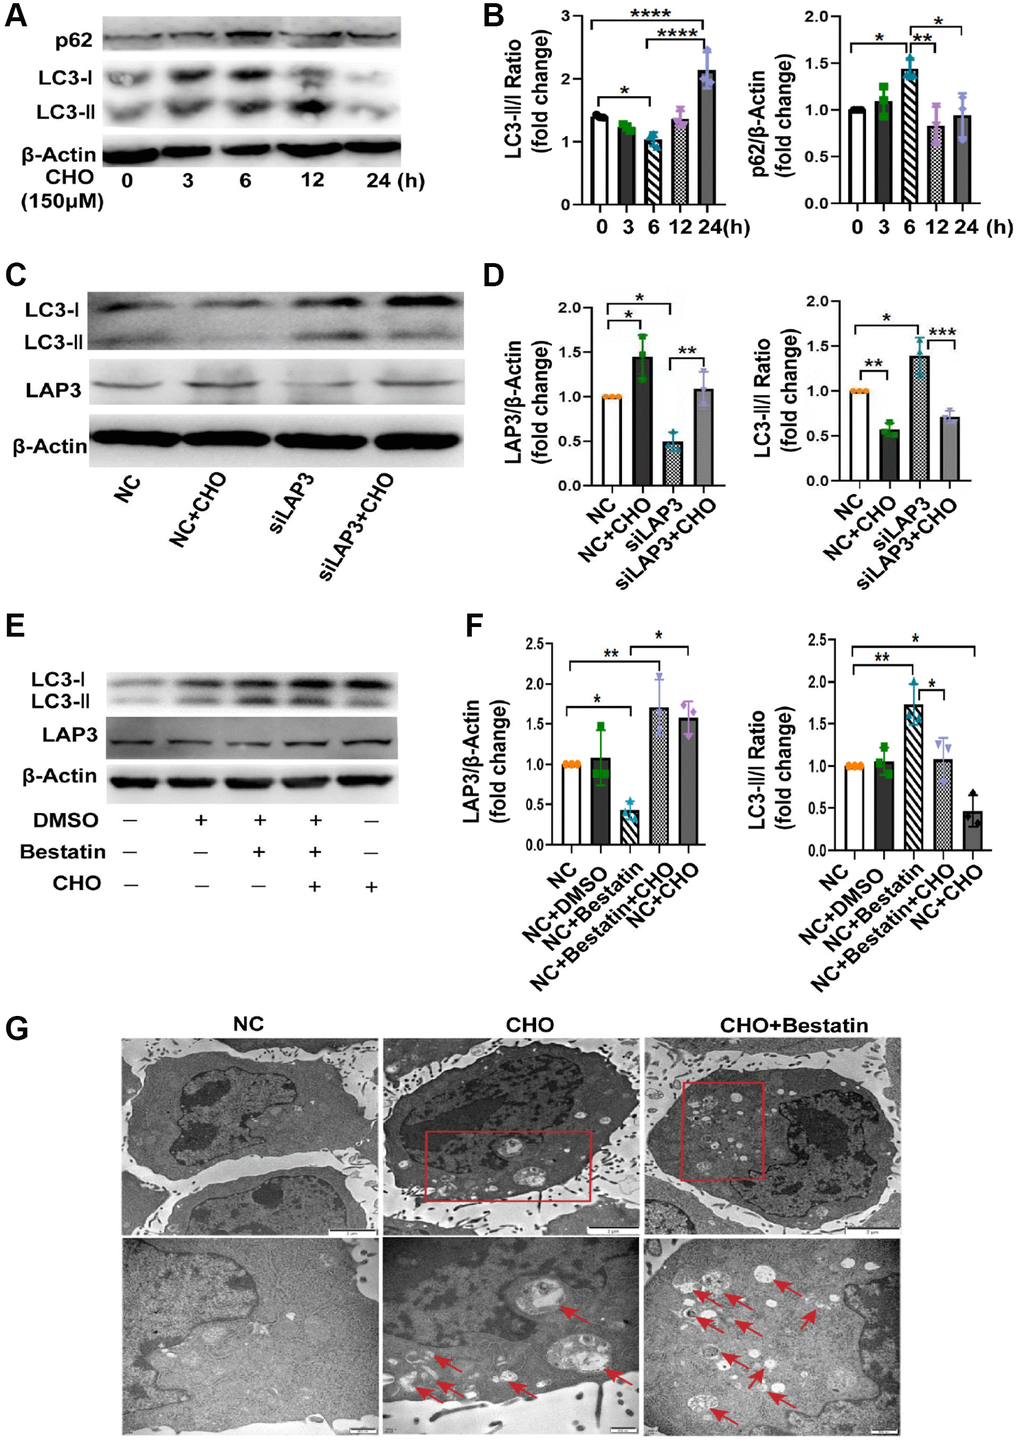 Upregulation of LAP3 by cholesterol inhibits autophagy in LO2 cells. (A and B) Representative western blotting detailing autophagic flux in CHO-treated LO2 cells (A) and quantitative analysis (B). (C and D) Evaluation of LAP3 and autophagy marker LC3 II and LC3 I expression after treatment of LO2 cells with 150 μM CHO or siLAP3 at 6 h by western blotting (C) and quantitative analysis (D). (E and F) Evaluation of LAP3 and LC3 II and LC3 I expression after treatment LO2 cell with 150 μM CHO or 14 μM bestatin at 6 h by western blotting (E) and quantitative analysis (F). (G) LO2 cells were treated with 150 μM CHO or 14 μM Bestatin for 6 h, the formation of autophagic vacuoles (→) was examined by transmission electron microscopy analysis. Data are expressed as means ± SD from three independent experiments. *p **p ***p 